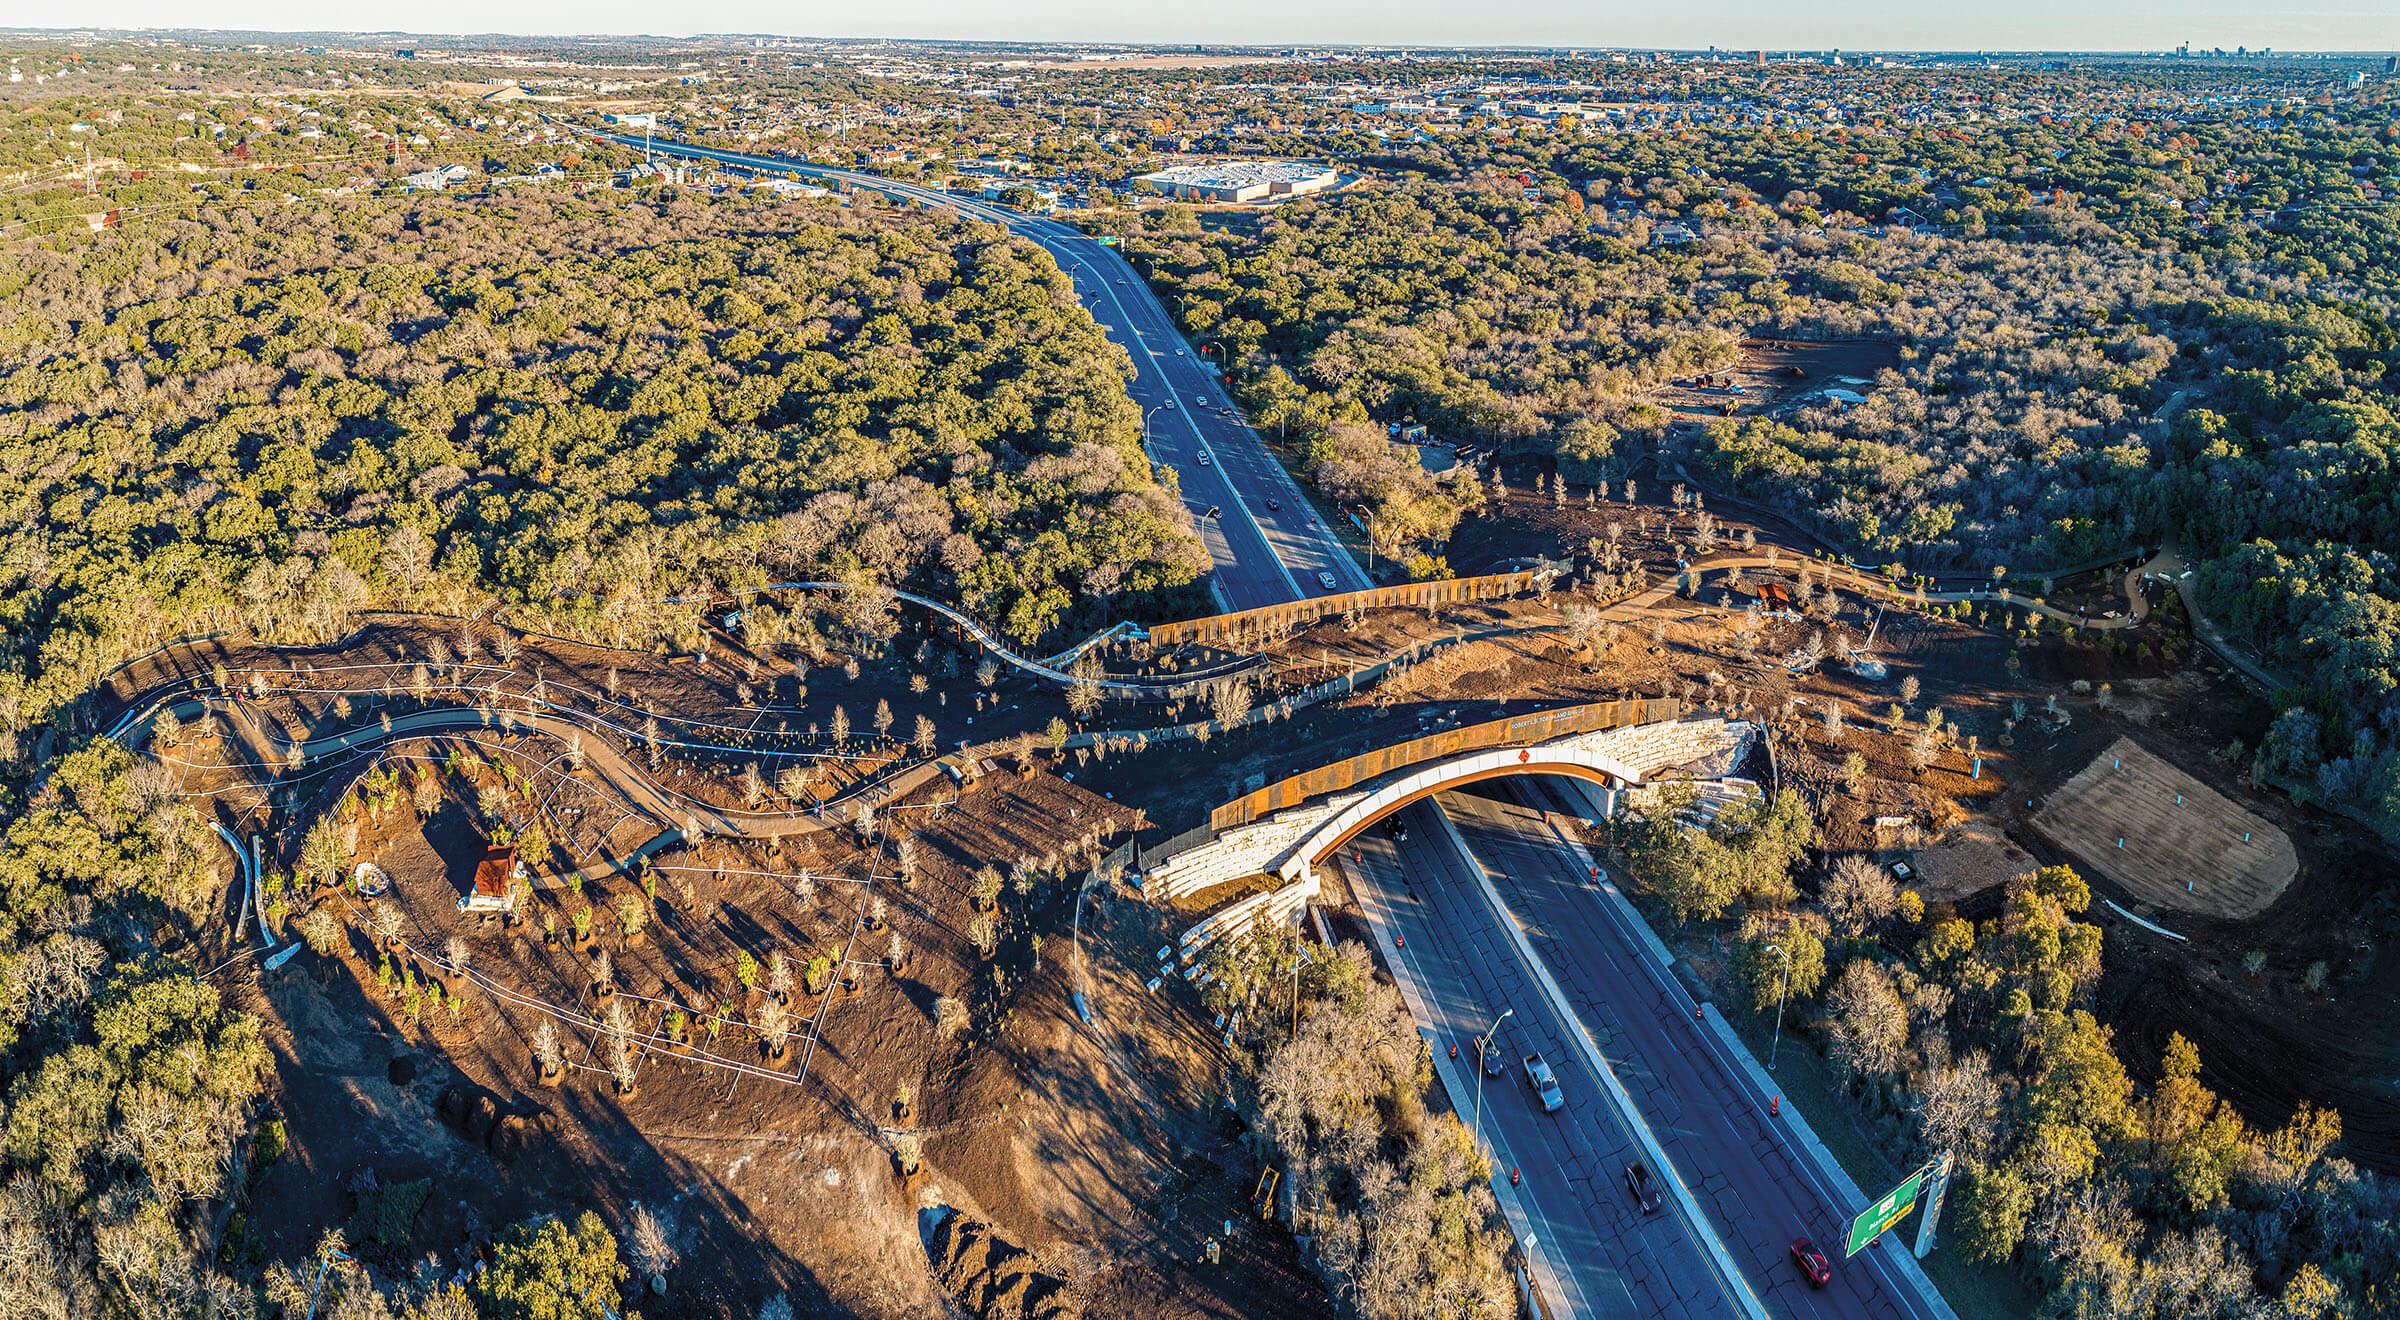 A land bridge being constructed over a road with large green trees on either side